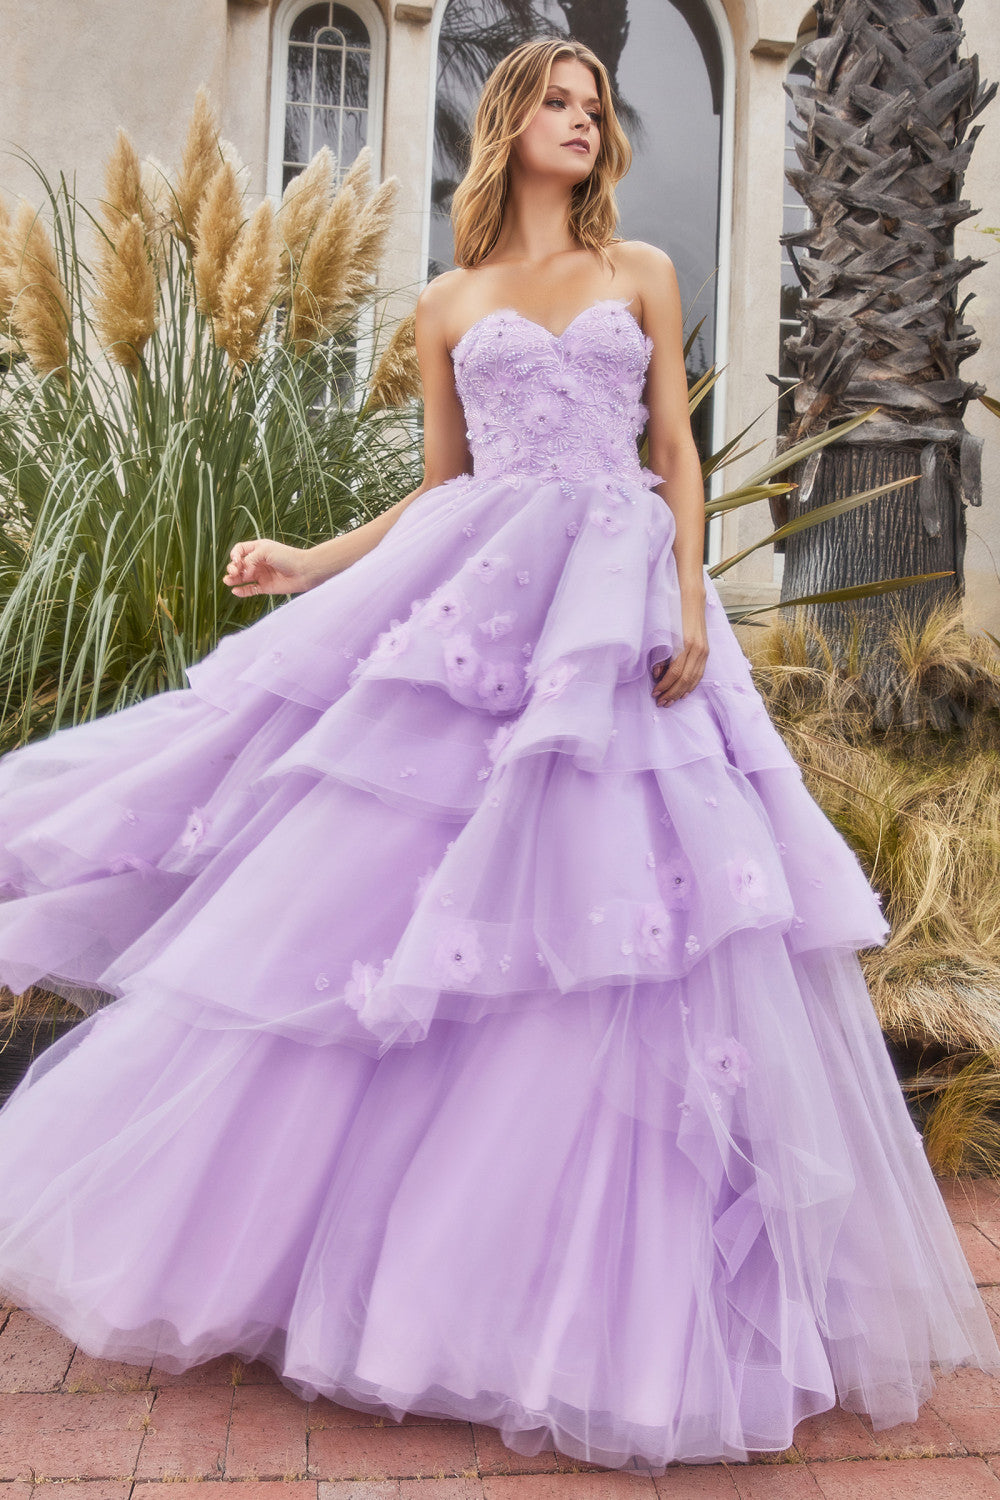 Lavender Stone, Beads and Sequins work Bridal Gown with Pleated Dupatt –  Seasons Chennai